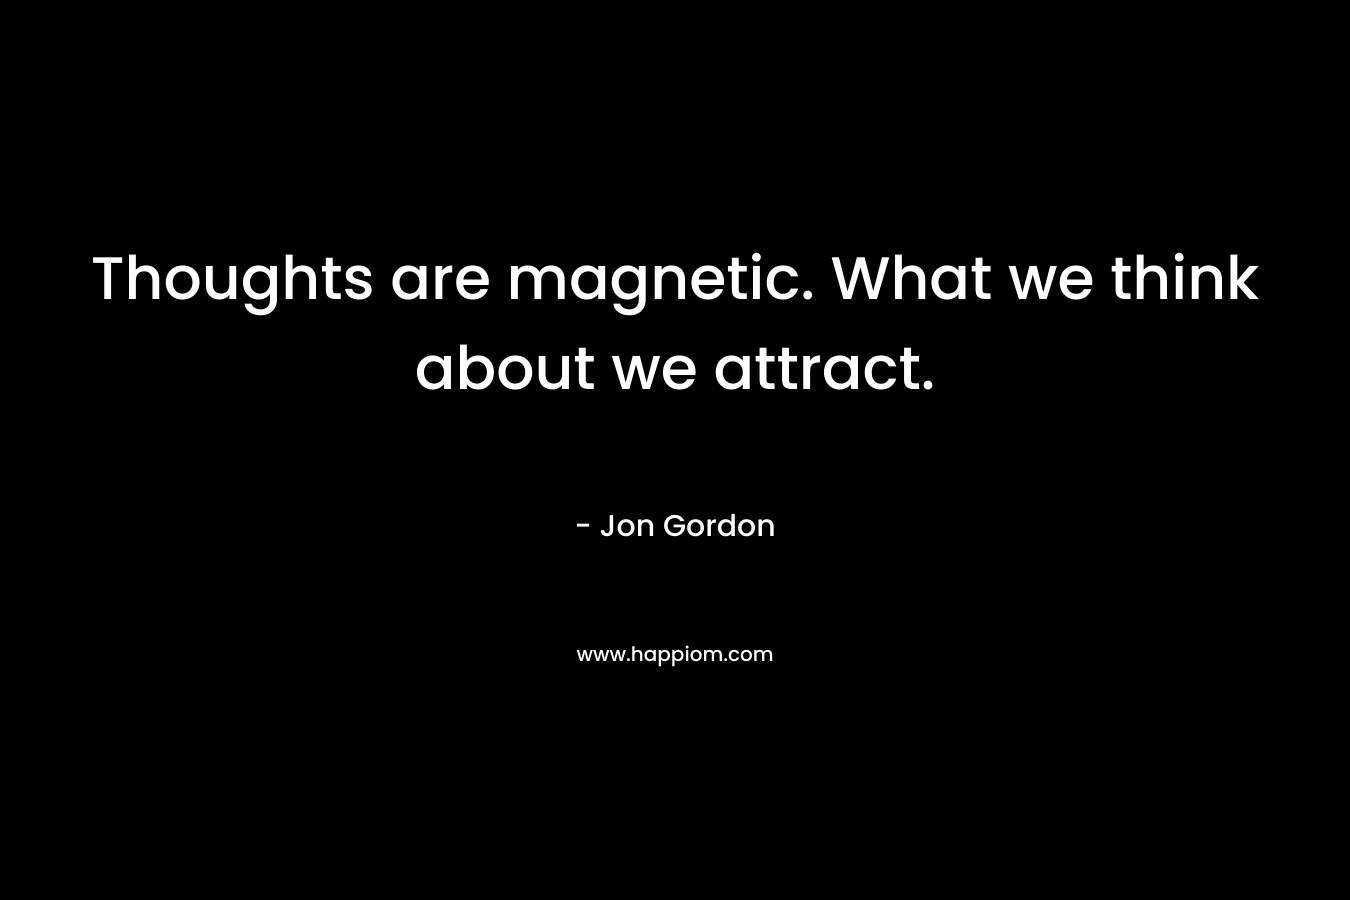 Thoughts are magnetic. What we think about we attract.